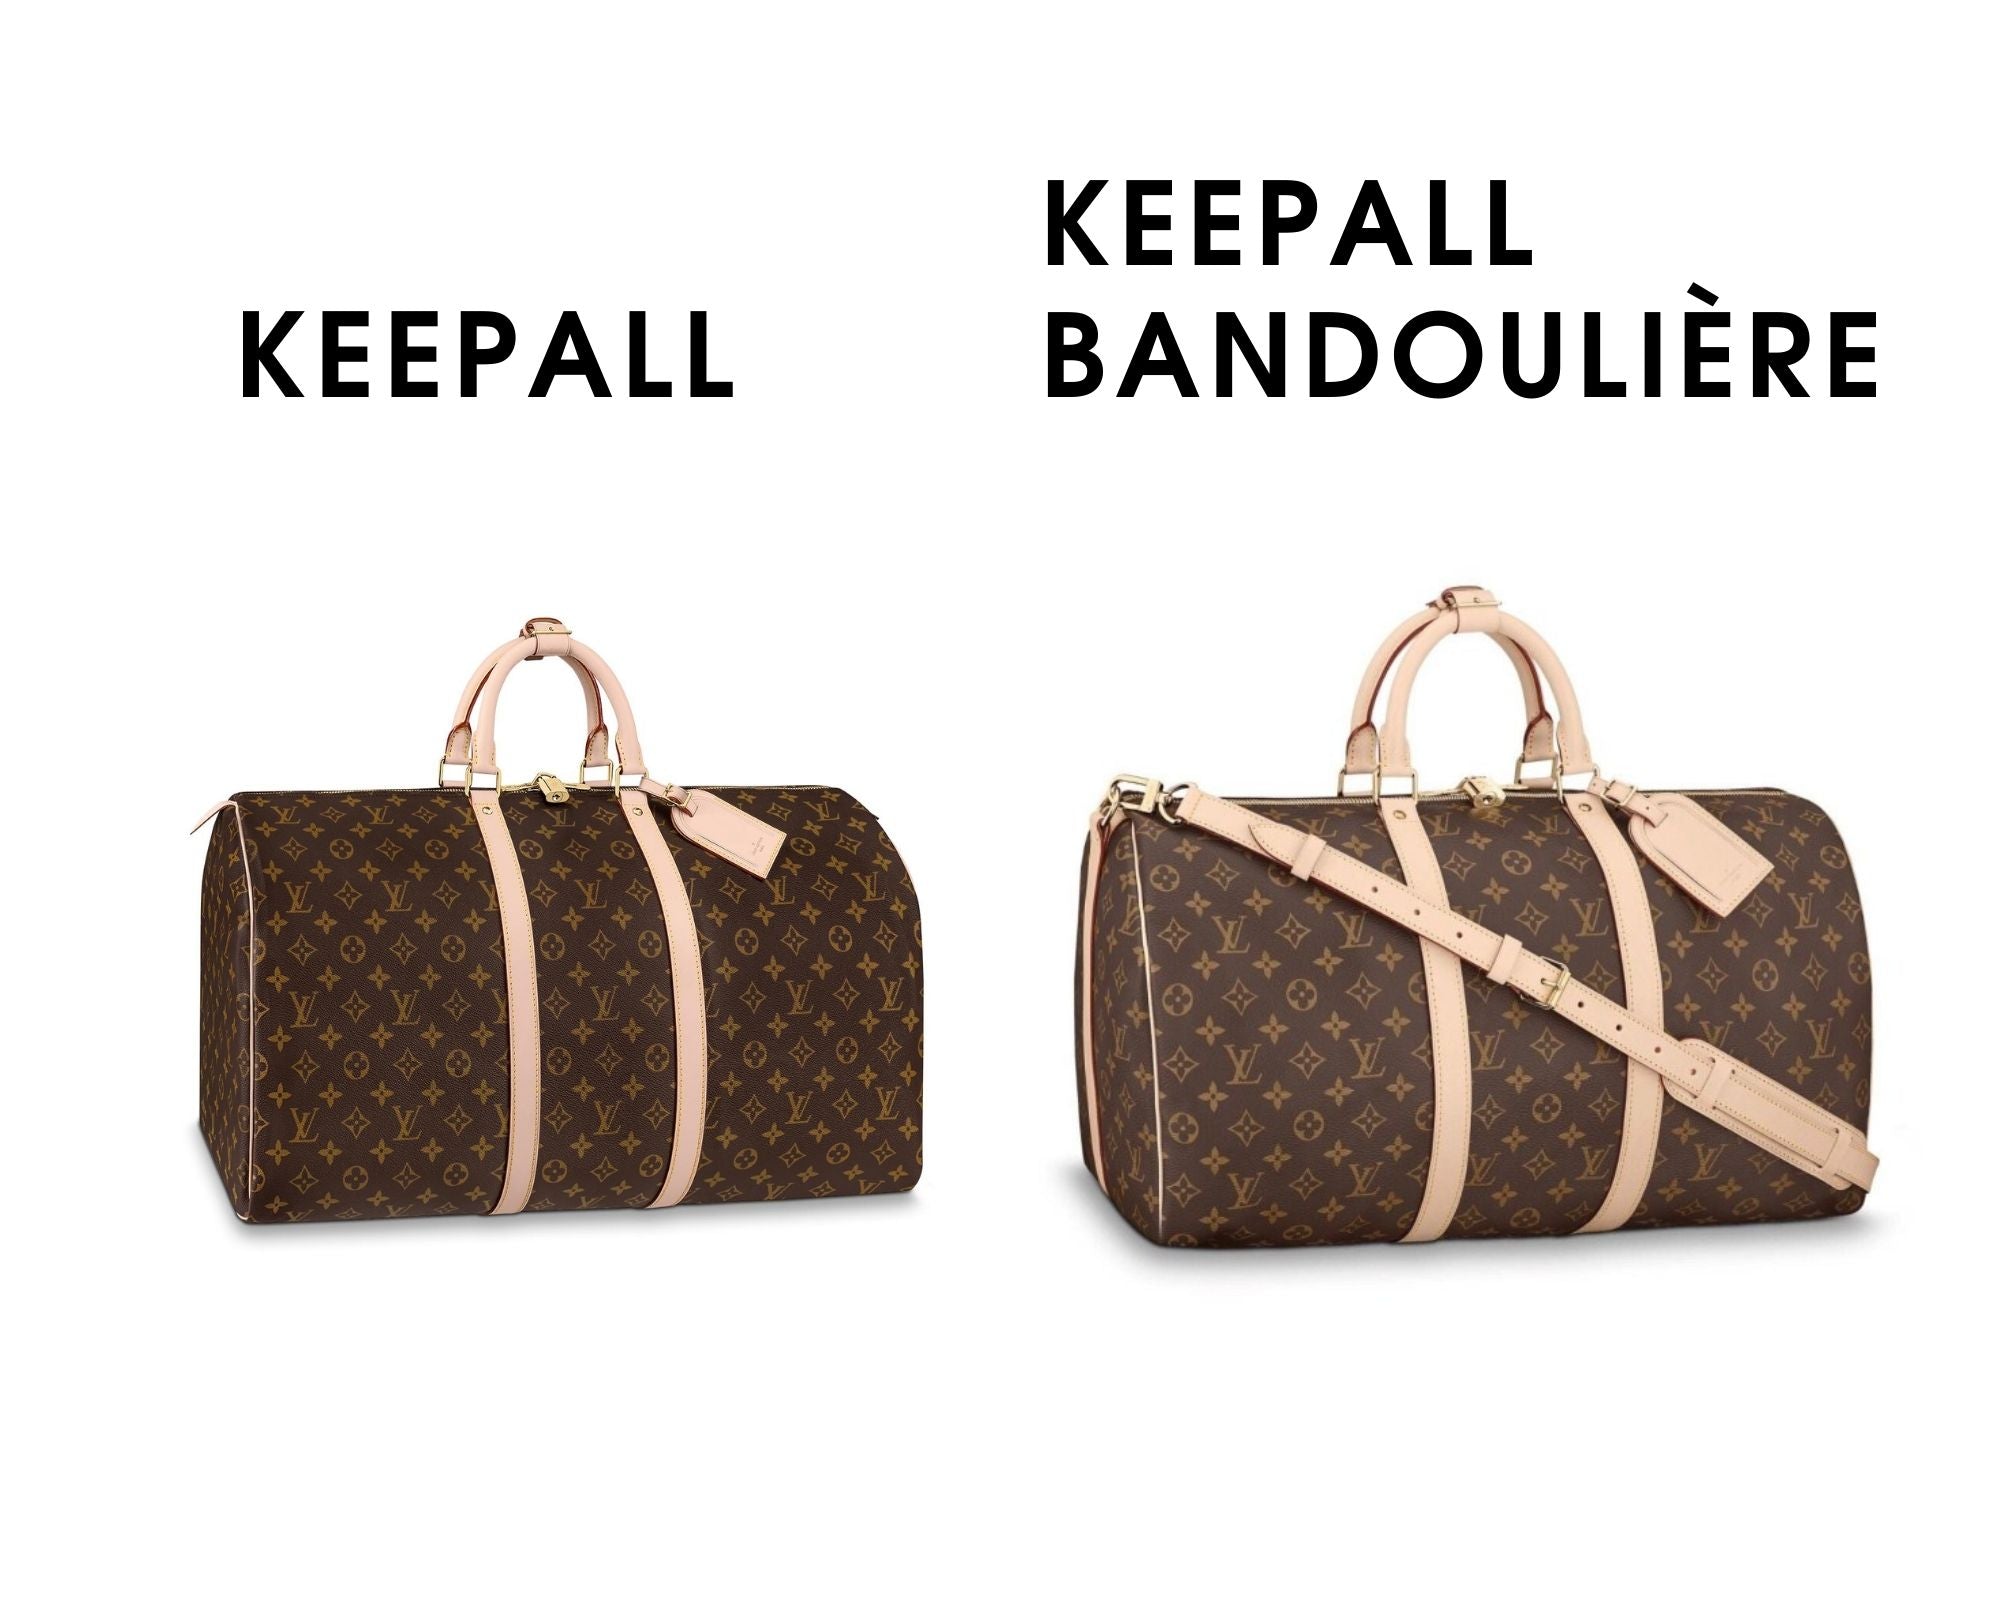 What Size Louis Vuitton Keepall Should I get? Keepall vs Keepall badouliere